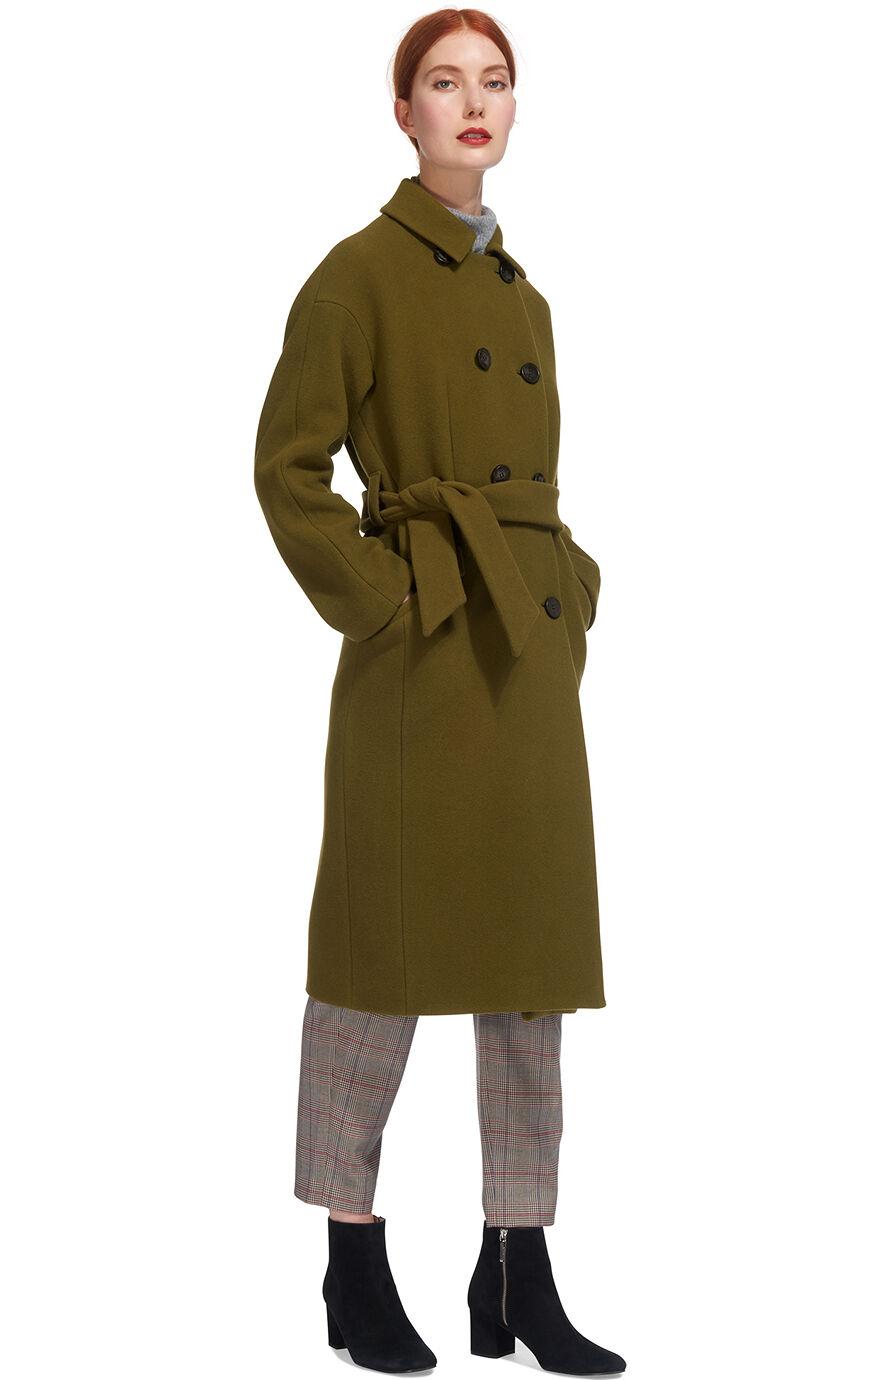 Whistles Wool Alicia Belted Db Coat in Olive (Green) - Lyst